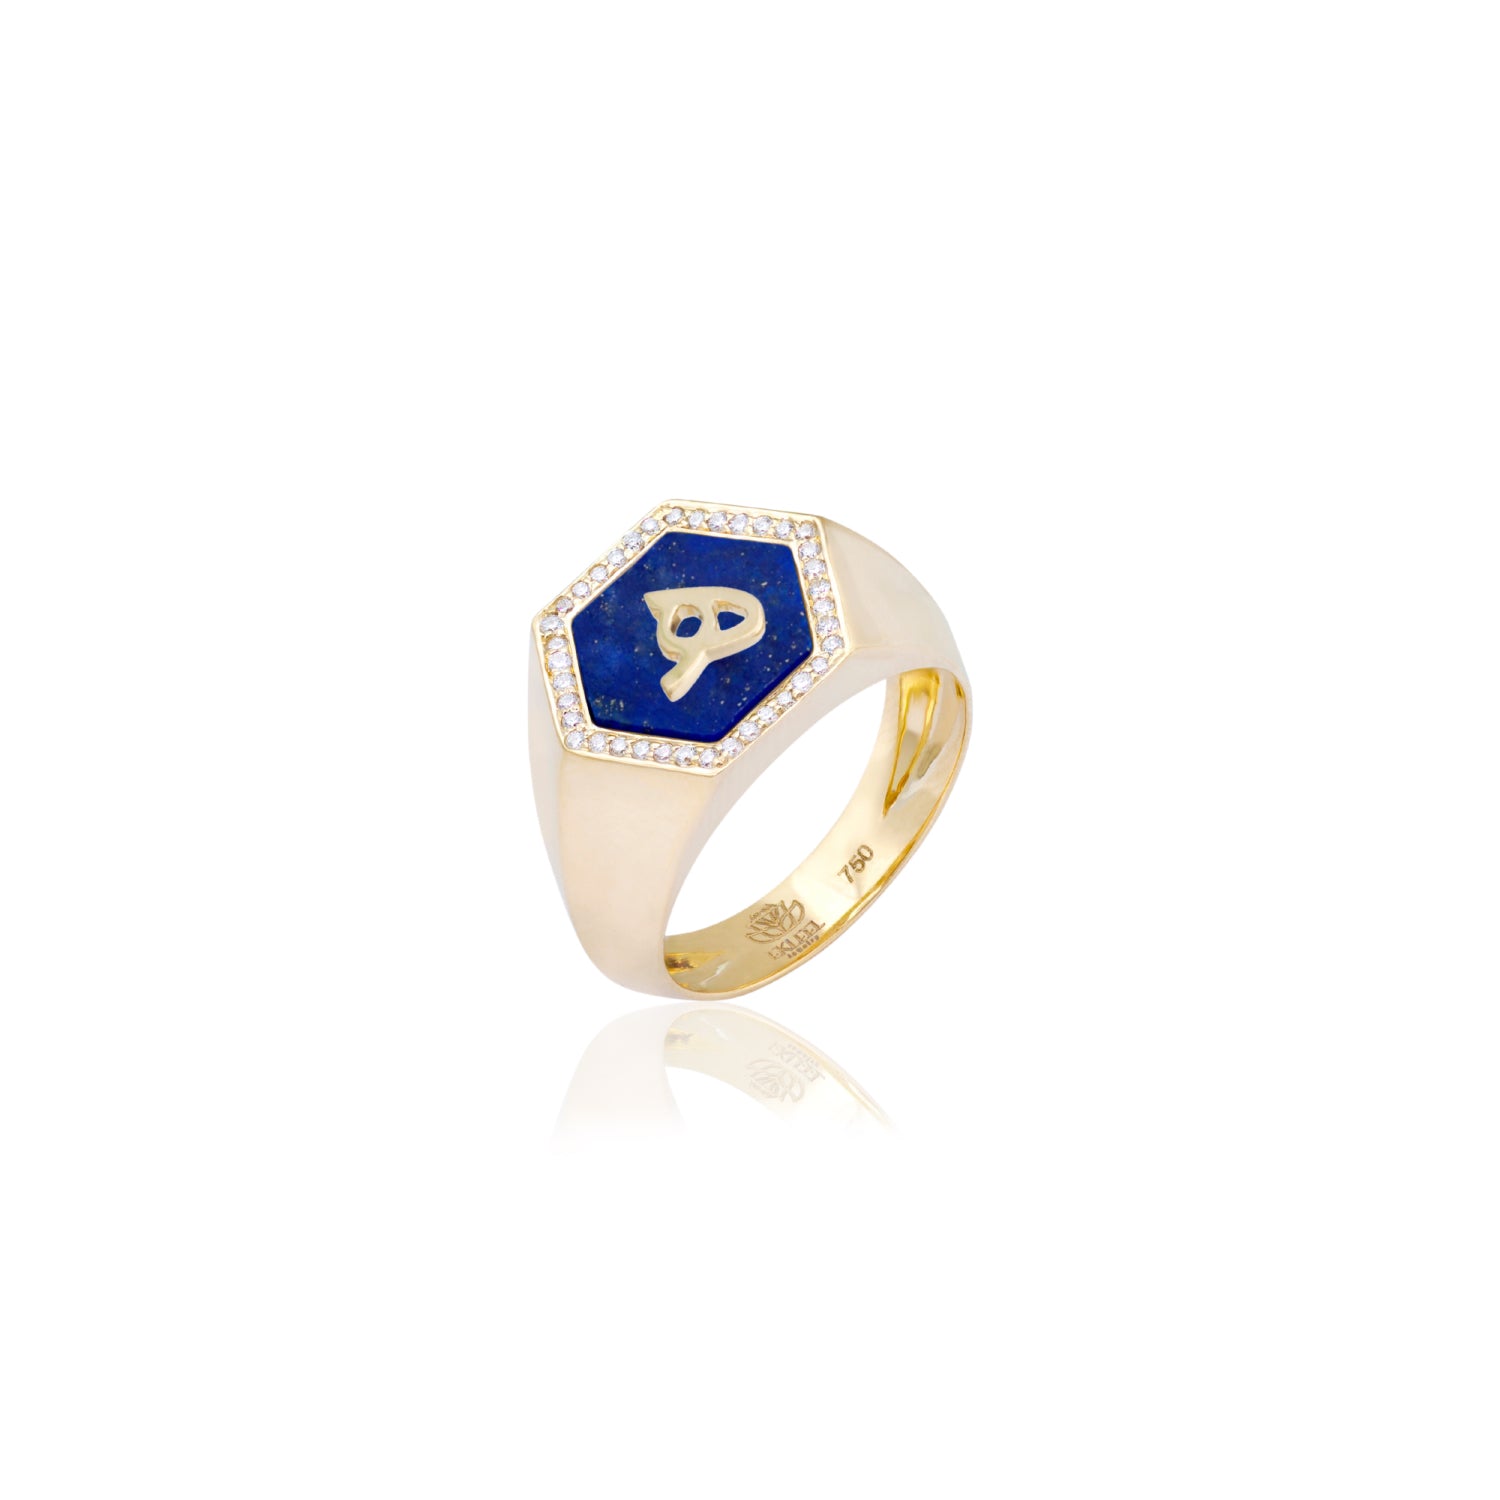 Qamoos 2.0 Letter هـ Lapis Lazuli and Diamond Signet Ring in Yellow Gold